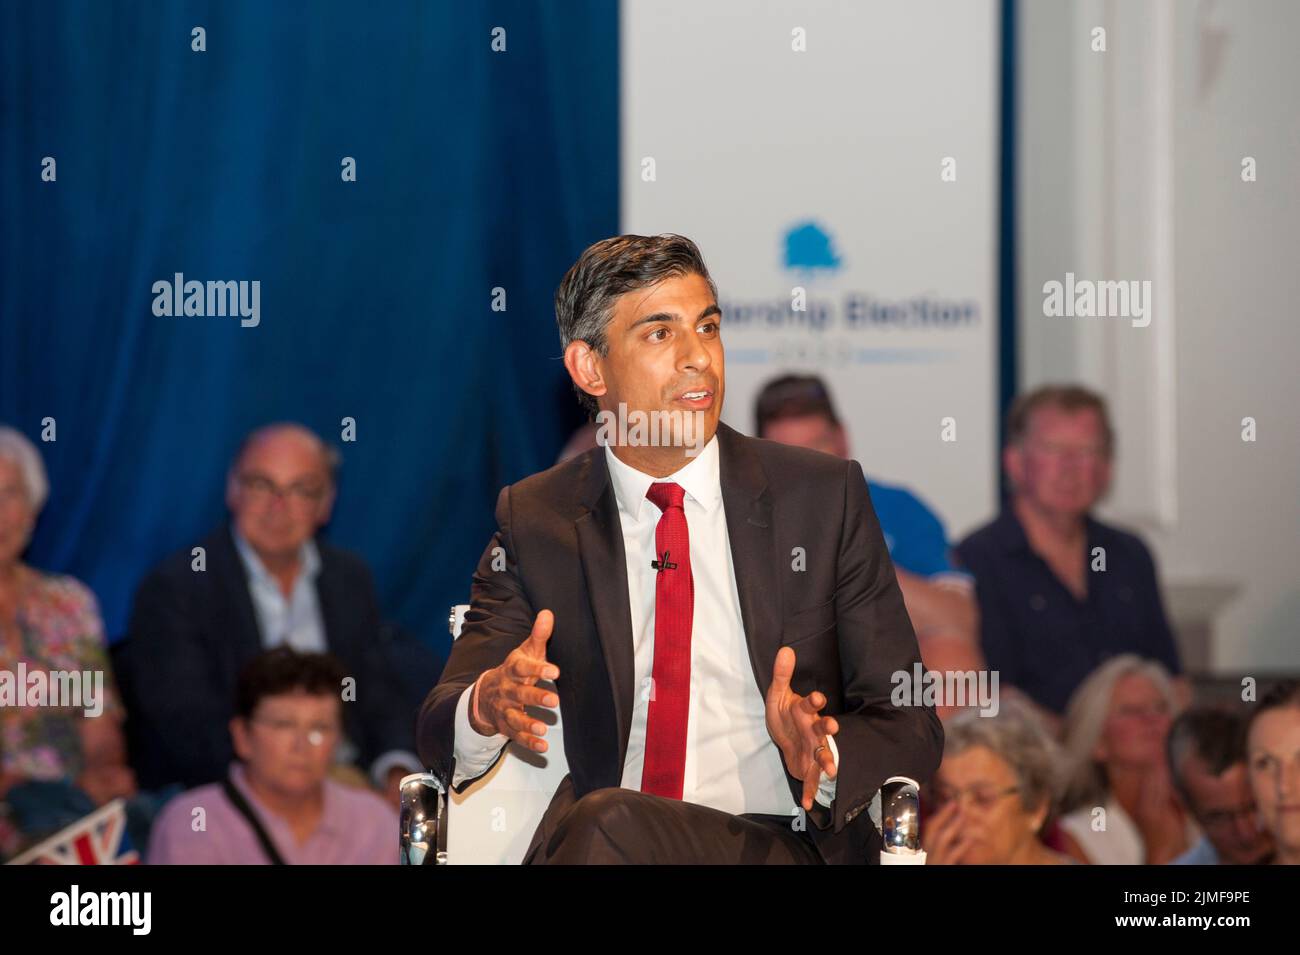 Rishi Sunak, former Conservative Chancellor, MP for Richmond (Yorks)  in Eastbourne to face questions from Conservative party members. Part of cross country hustings campaigning to replace Boris Johnson as Party Leader and Prime Minister. Stock Photo